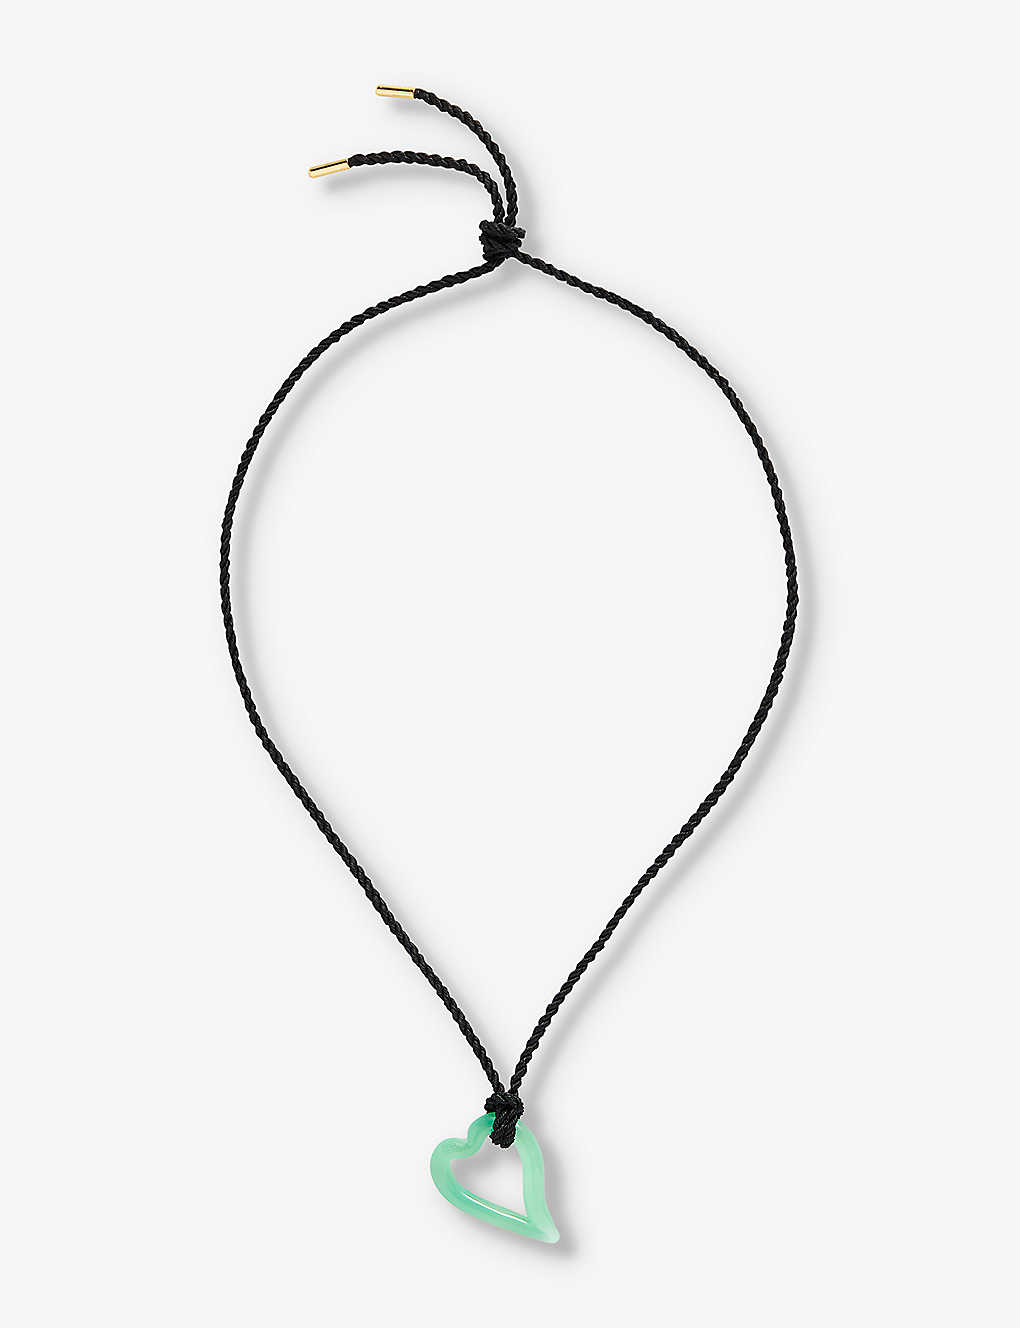 Sandralexandra Heart Of Glass Silk Cord And Glass Pendant Necklace In Jade Green/black Cord